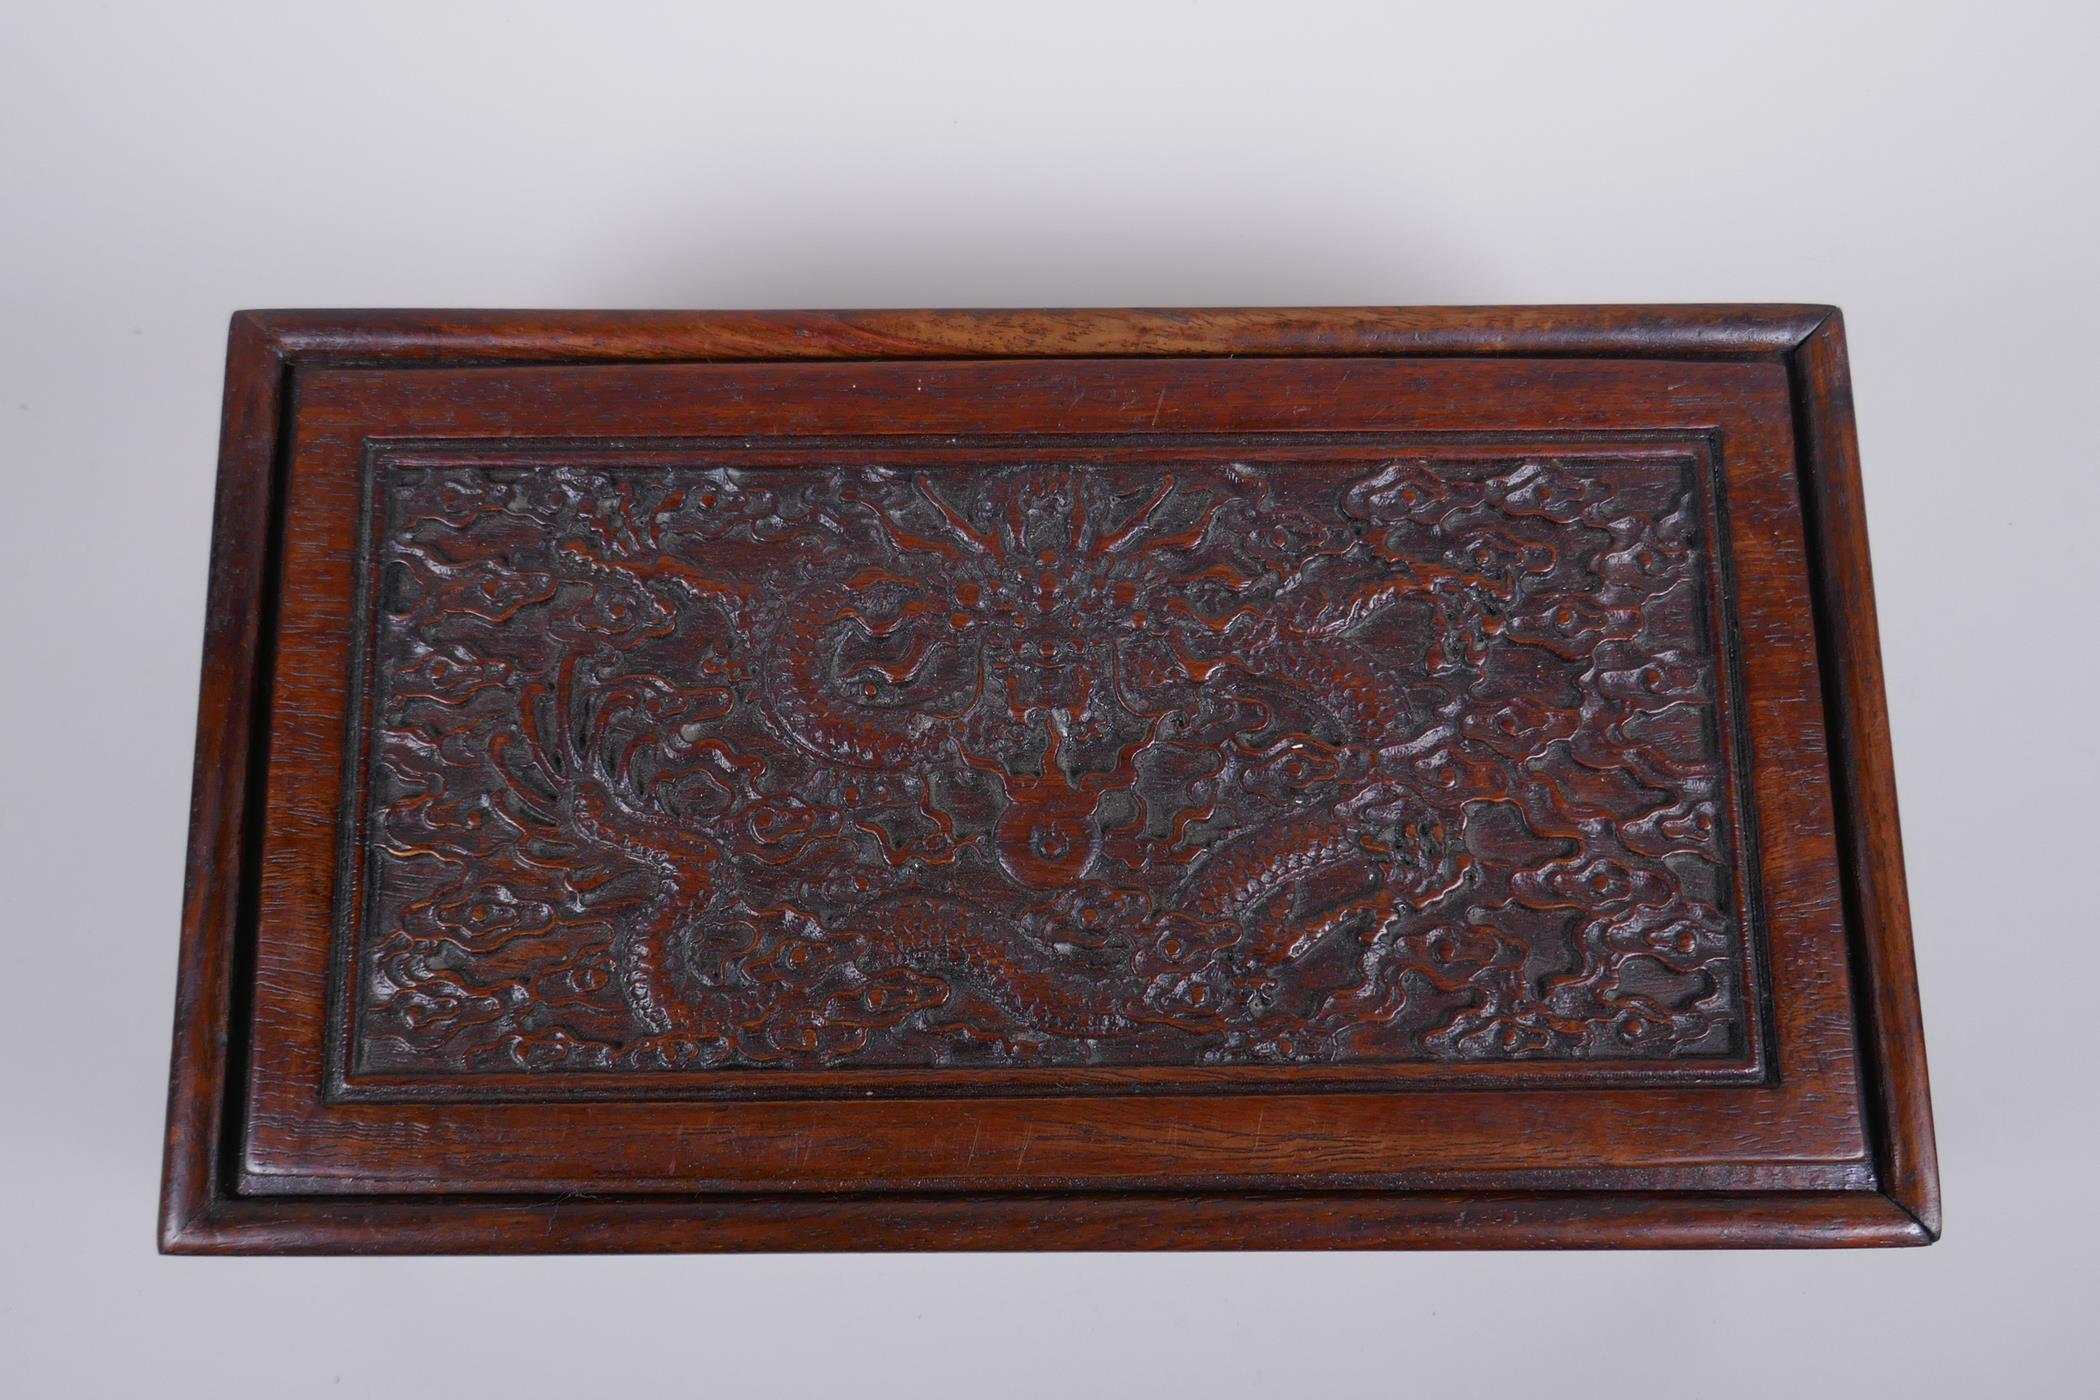 A Chinese carved hardwood box with dragon and character decoration, 28 x 16cm - Image 2 of 4